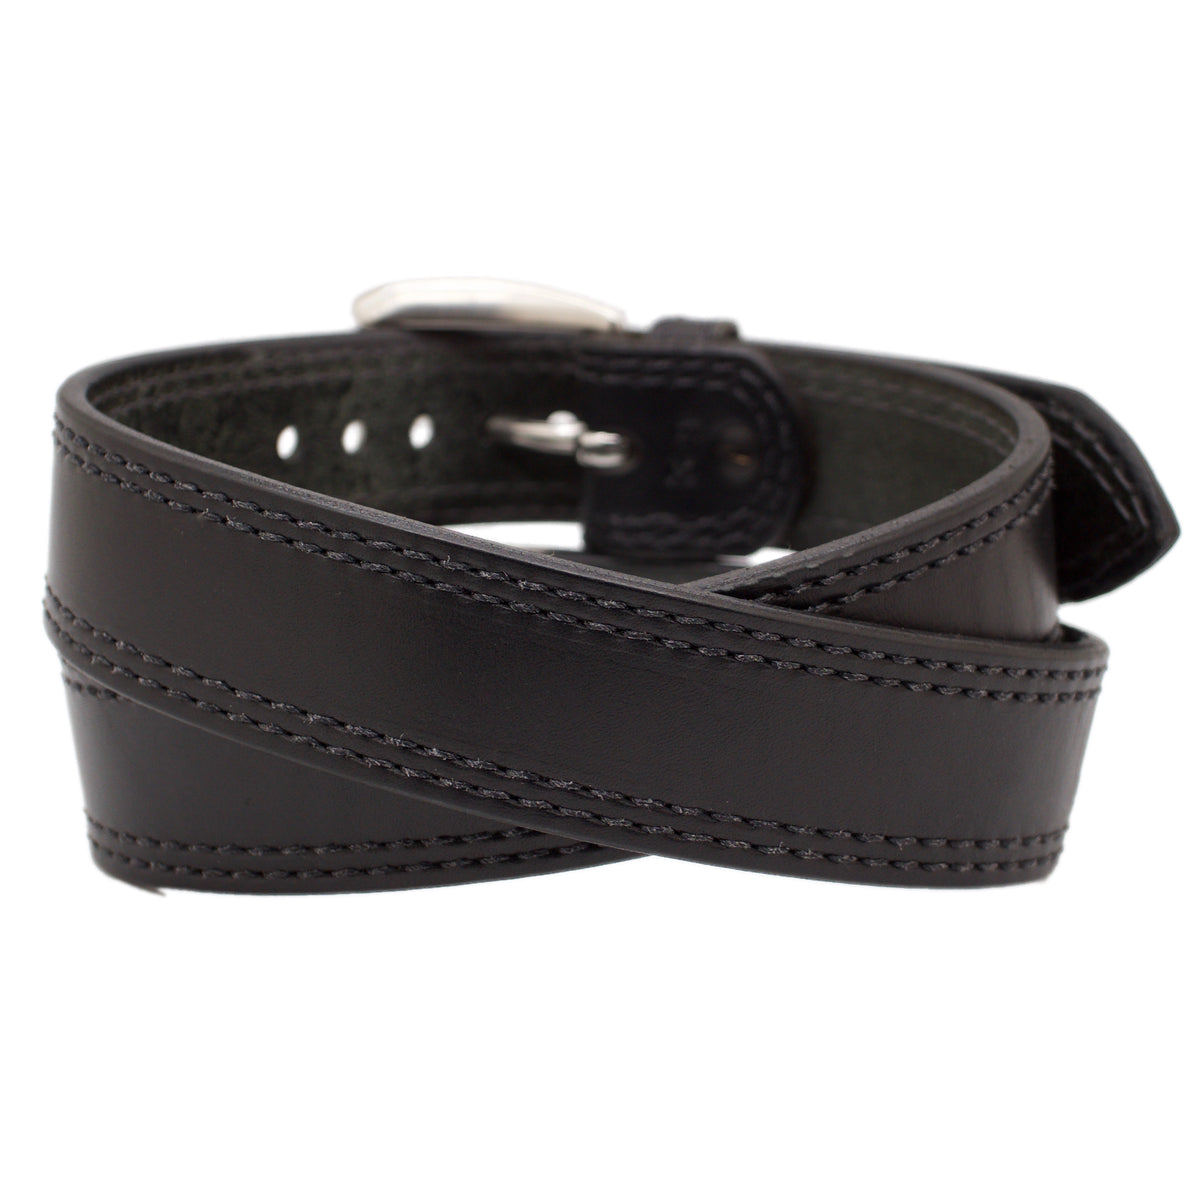 The ONYX Wide 1.75 Leather Belt